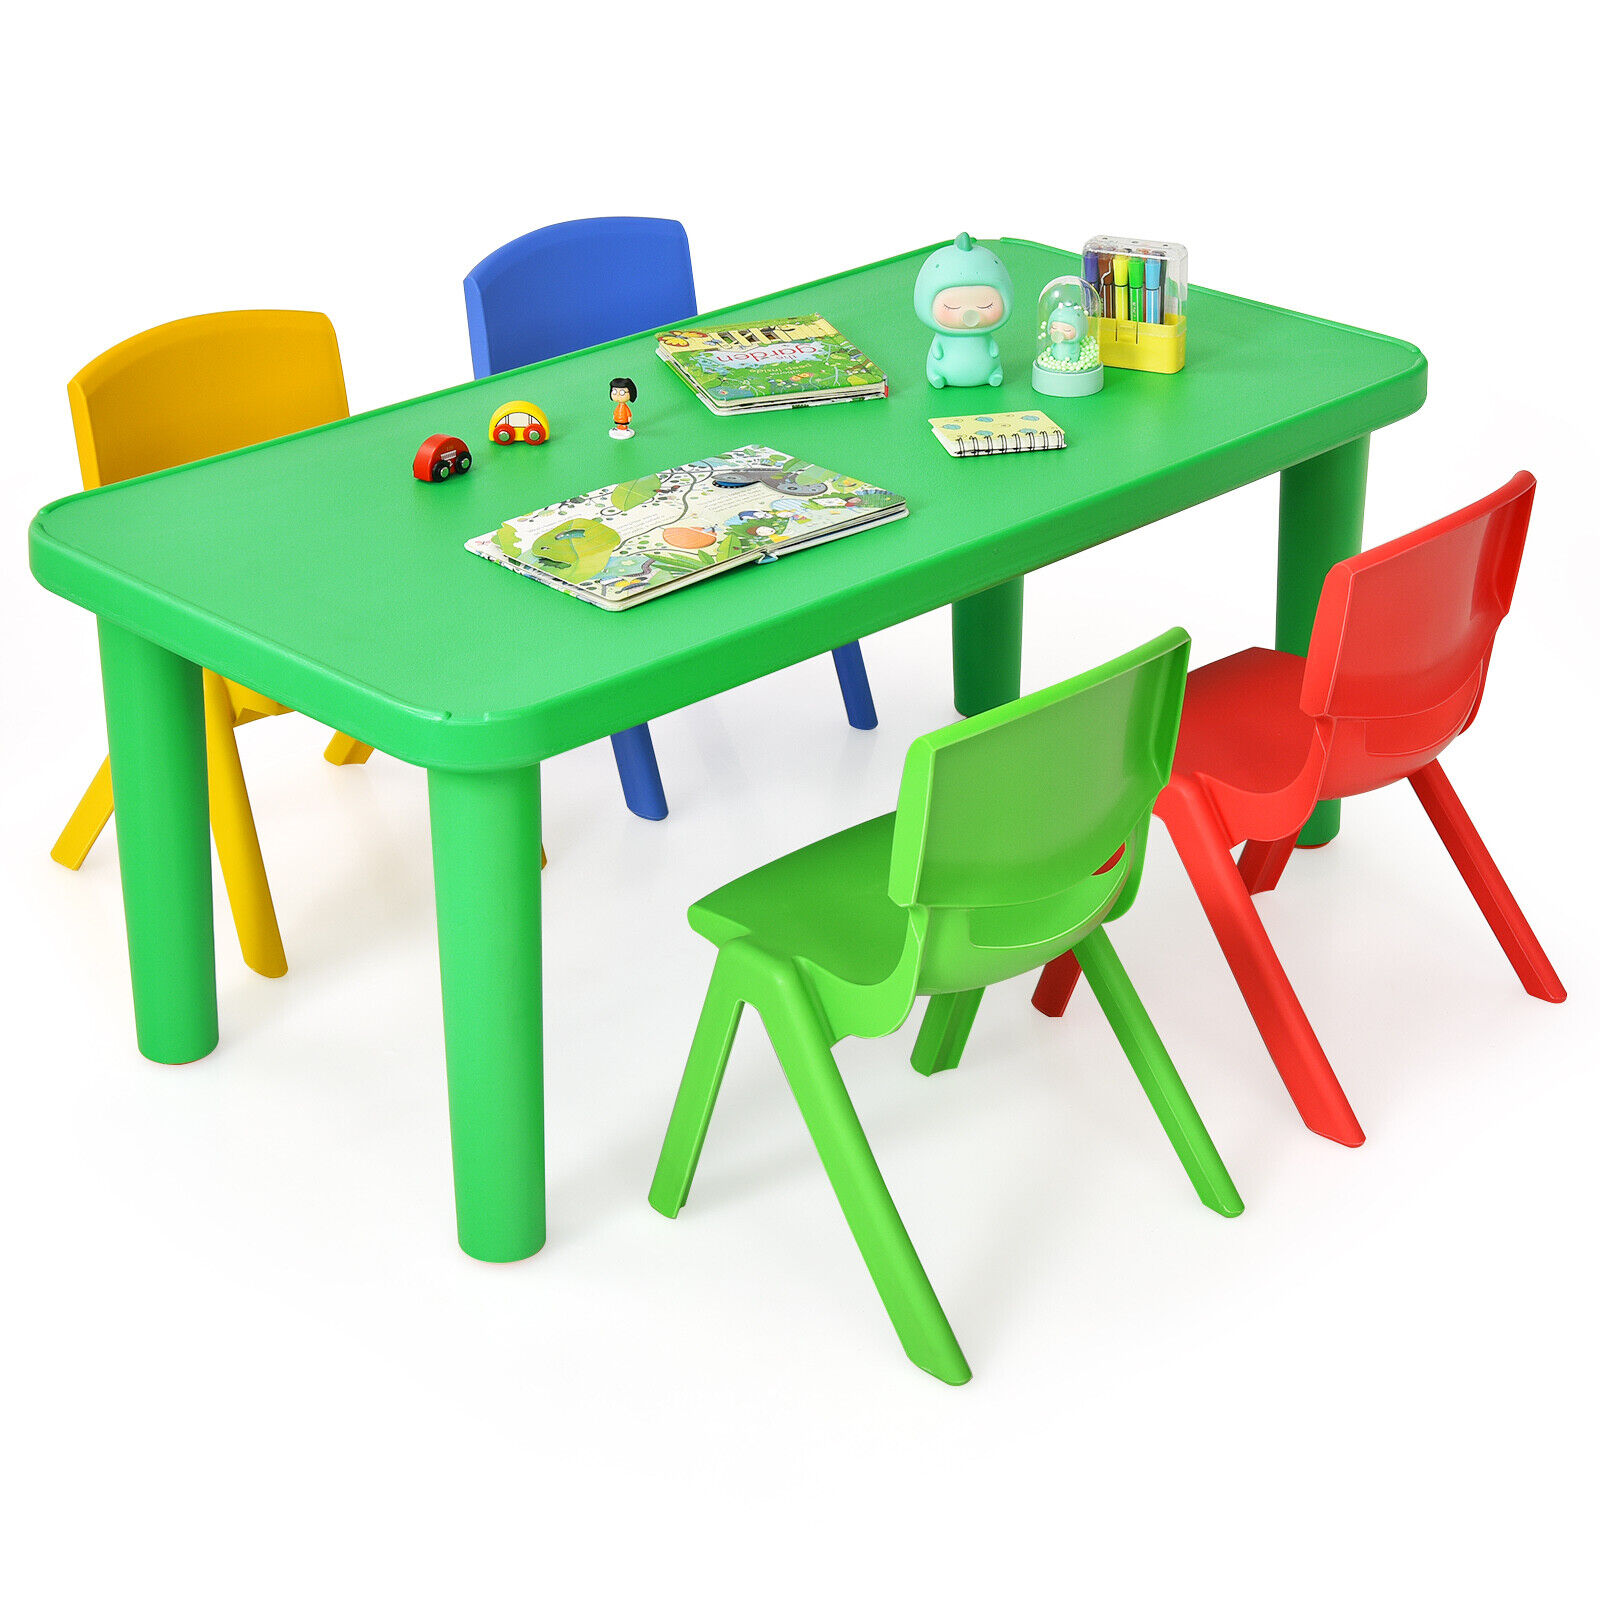 Great Choice Products New Kids Plastic Table And 4 Chairs Set Colorful Play School Home Fun Furniture